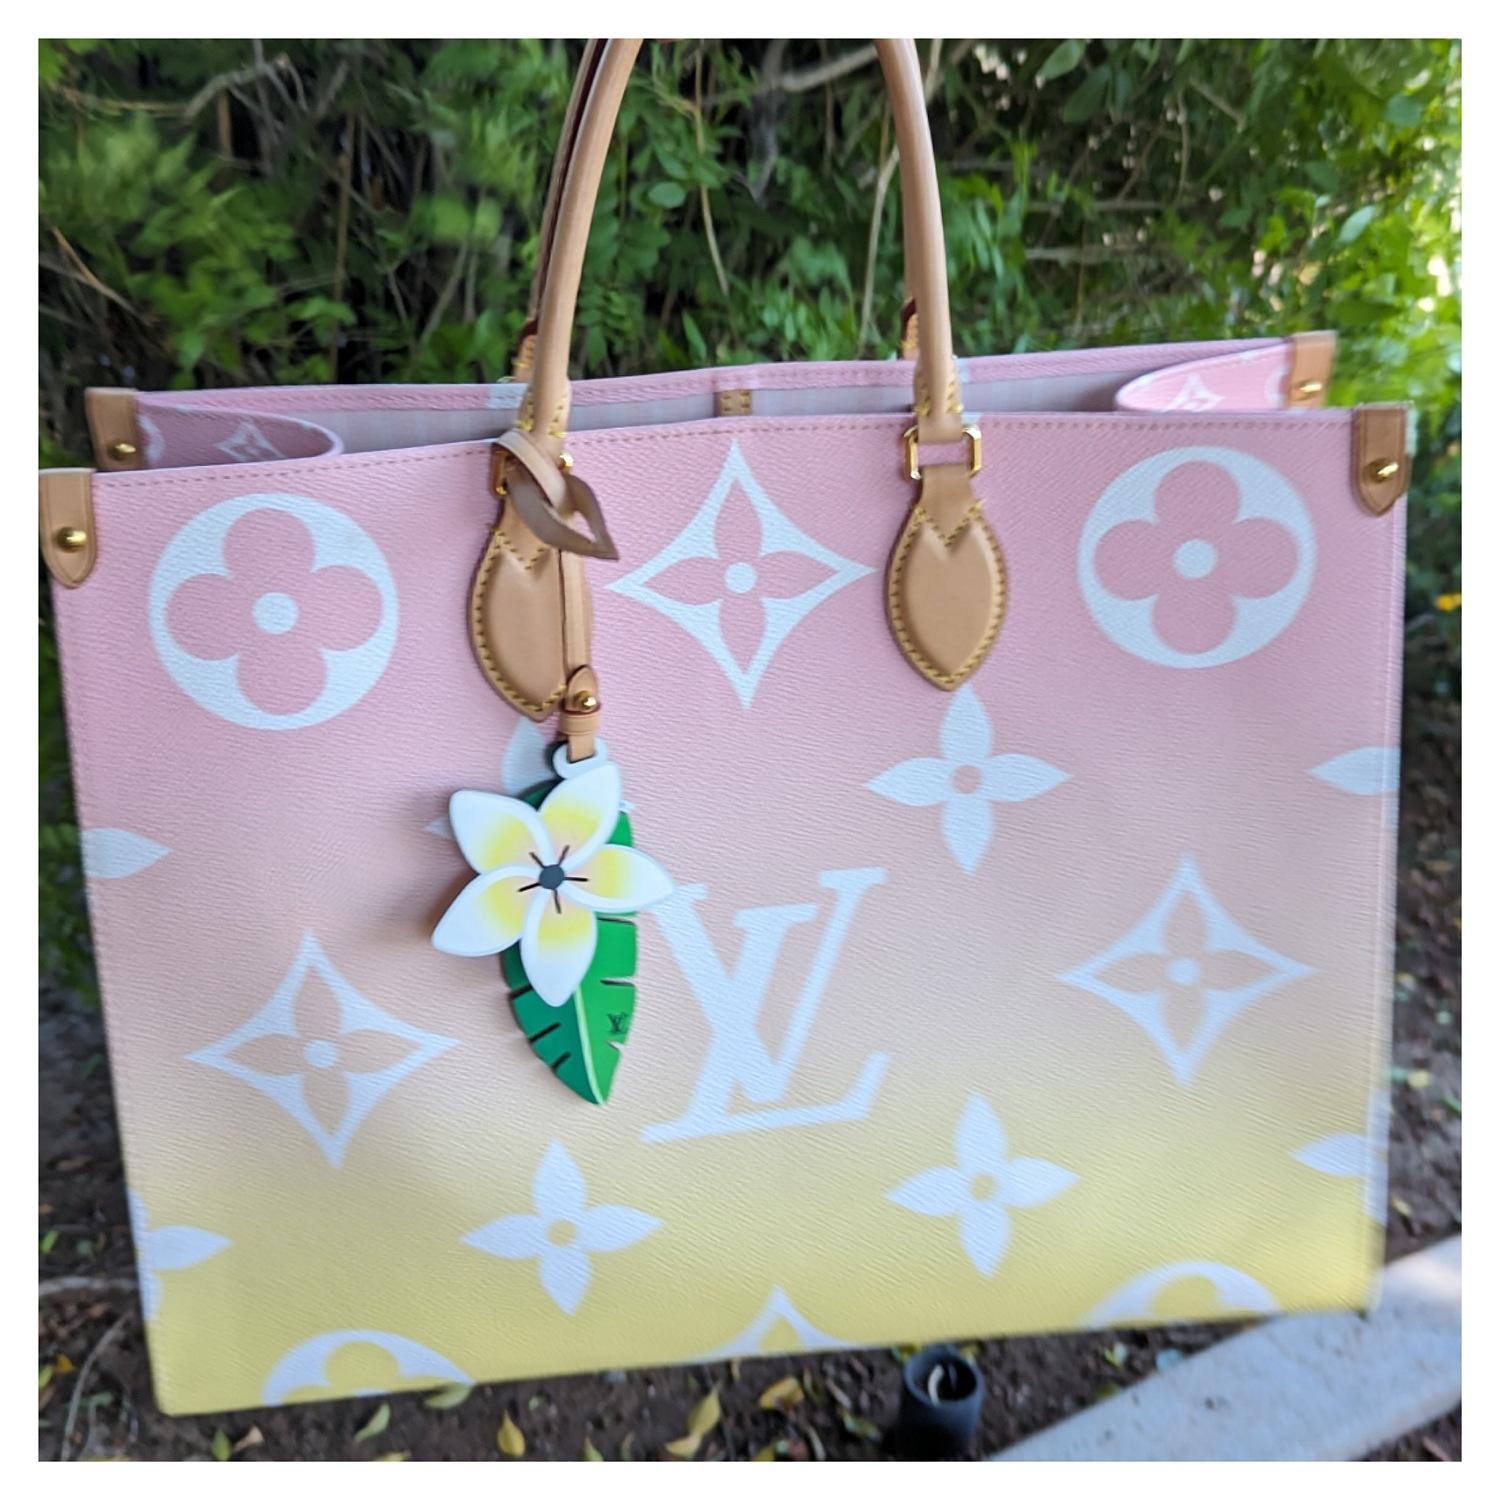 Louis Vuitton Monogram Giant By The Pool Onthego GM in Light Pink. This limited edition tote features oversized and smaller versions of the classic Louis Vuitton monogram printed in white on an ombre pink-to-yellow coated canvas. The bag features